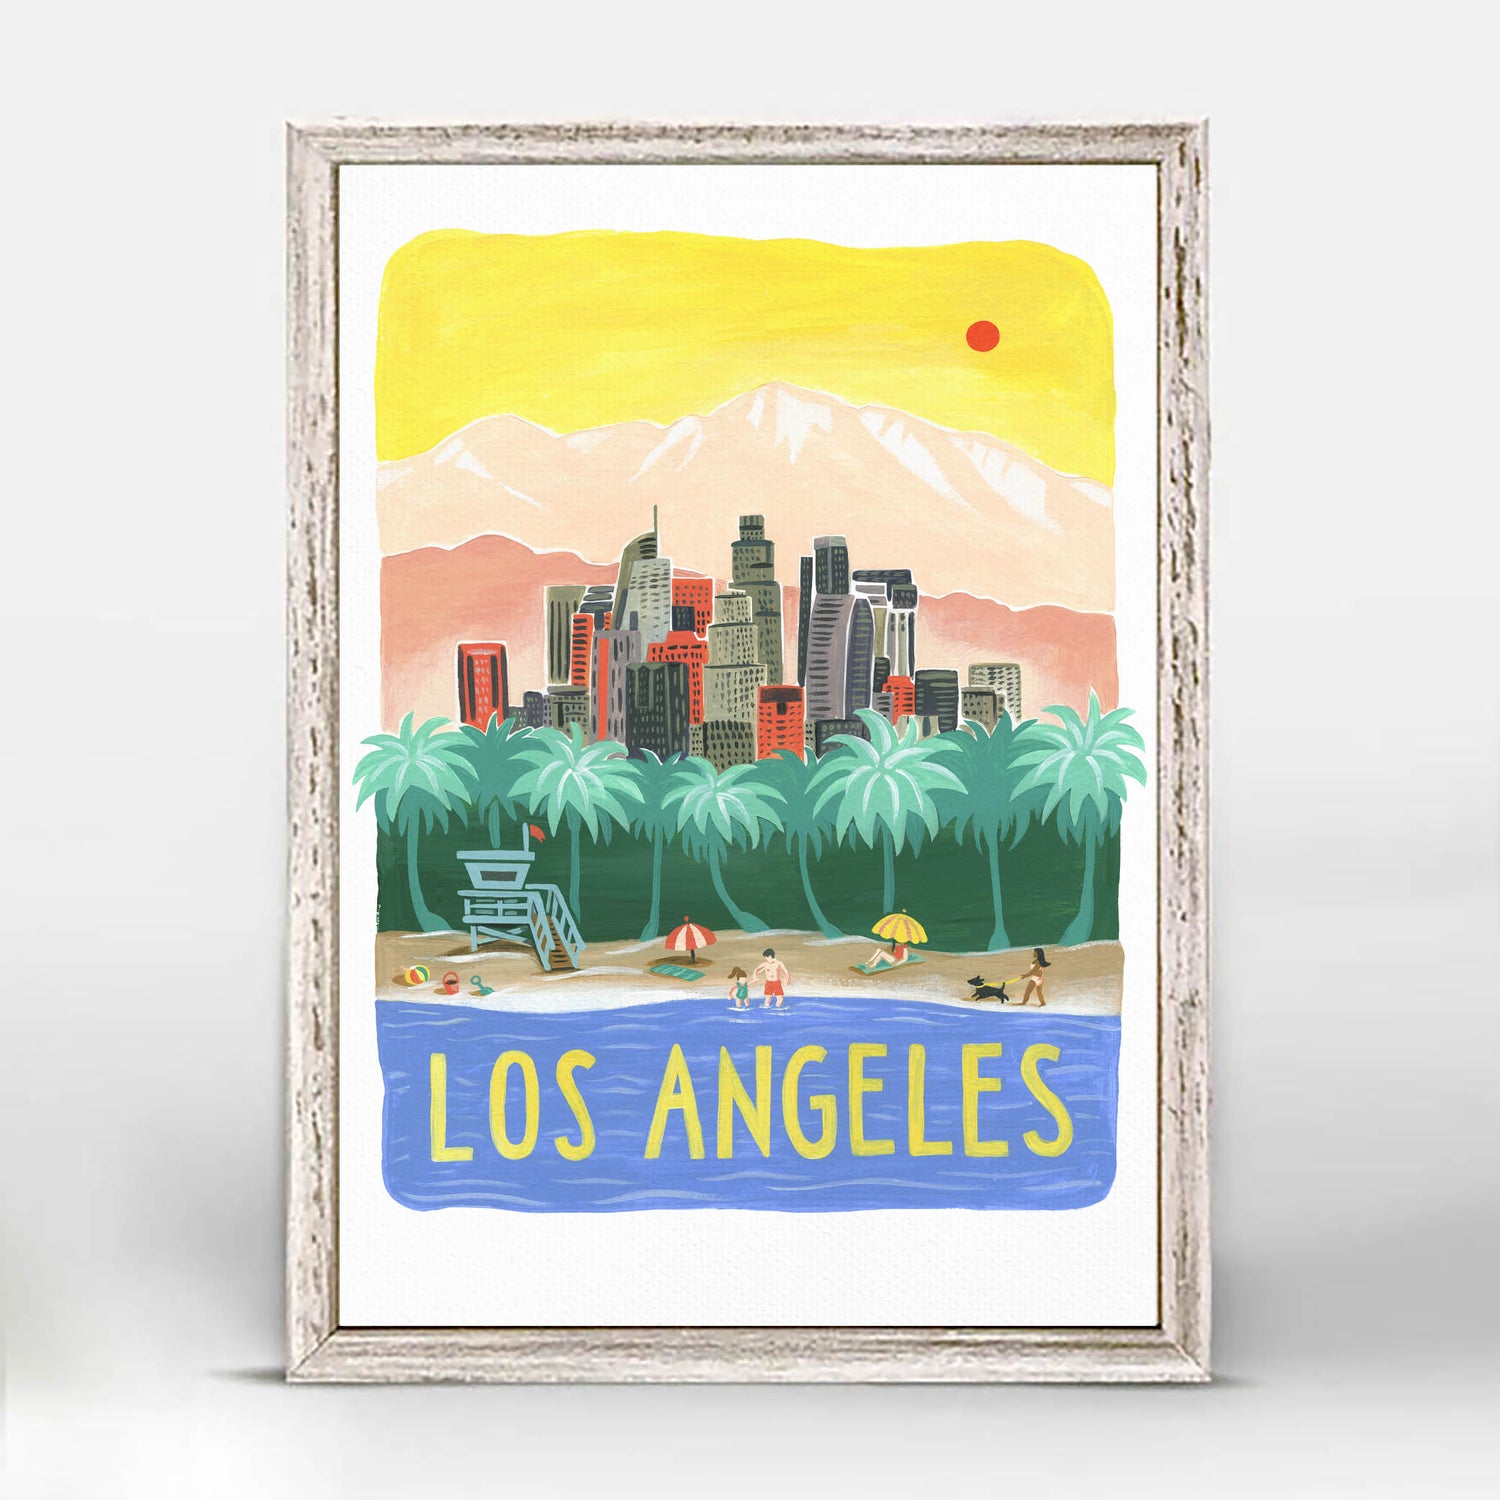 Los Angeles beach art with LA skyline and Hollywood Hills; illustration by Angela Staehling